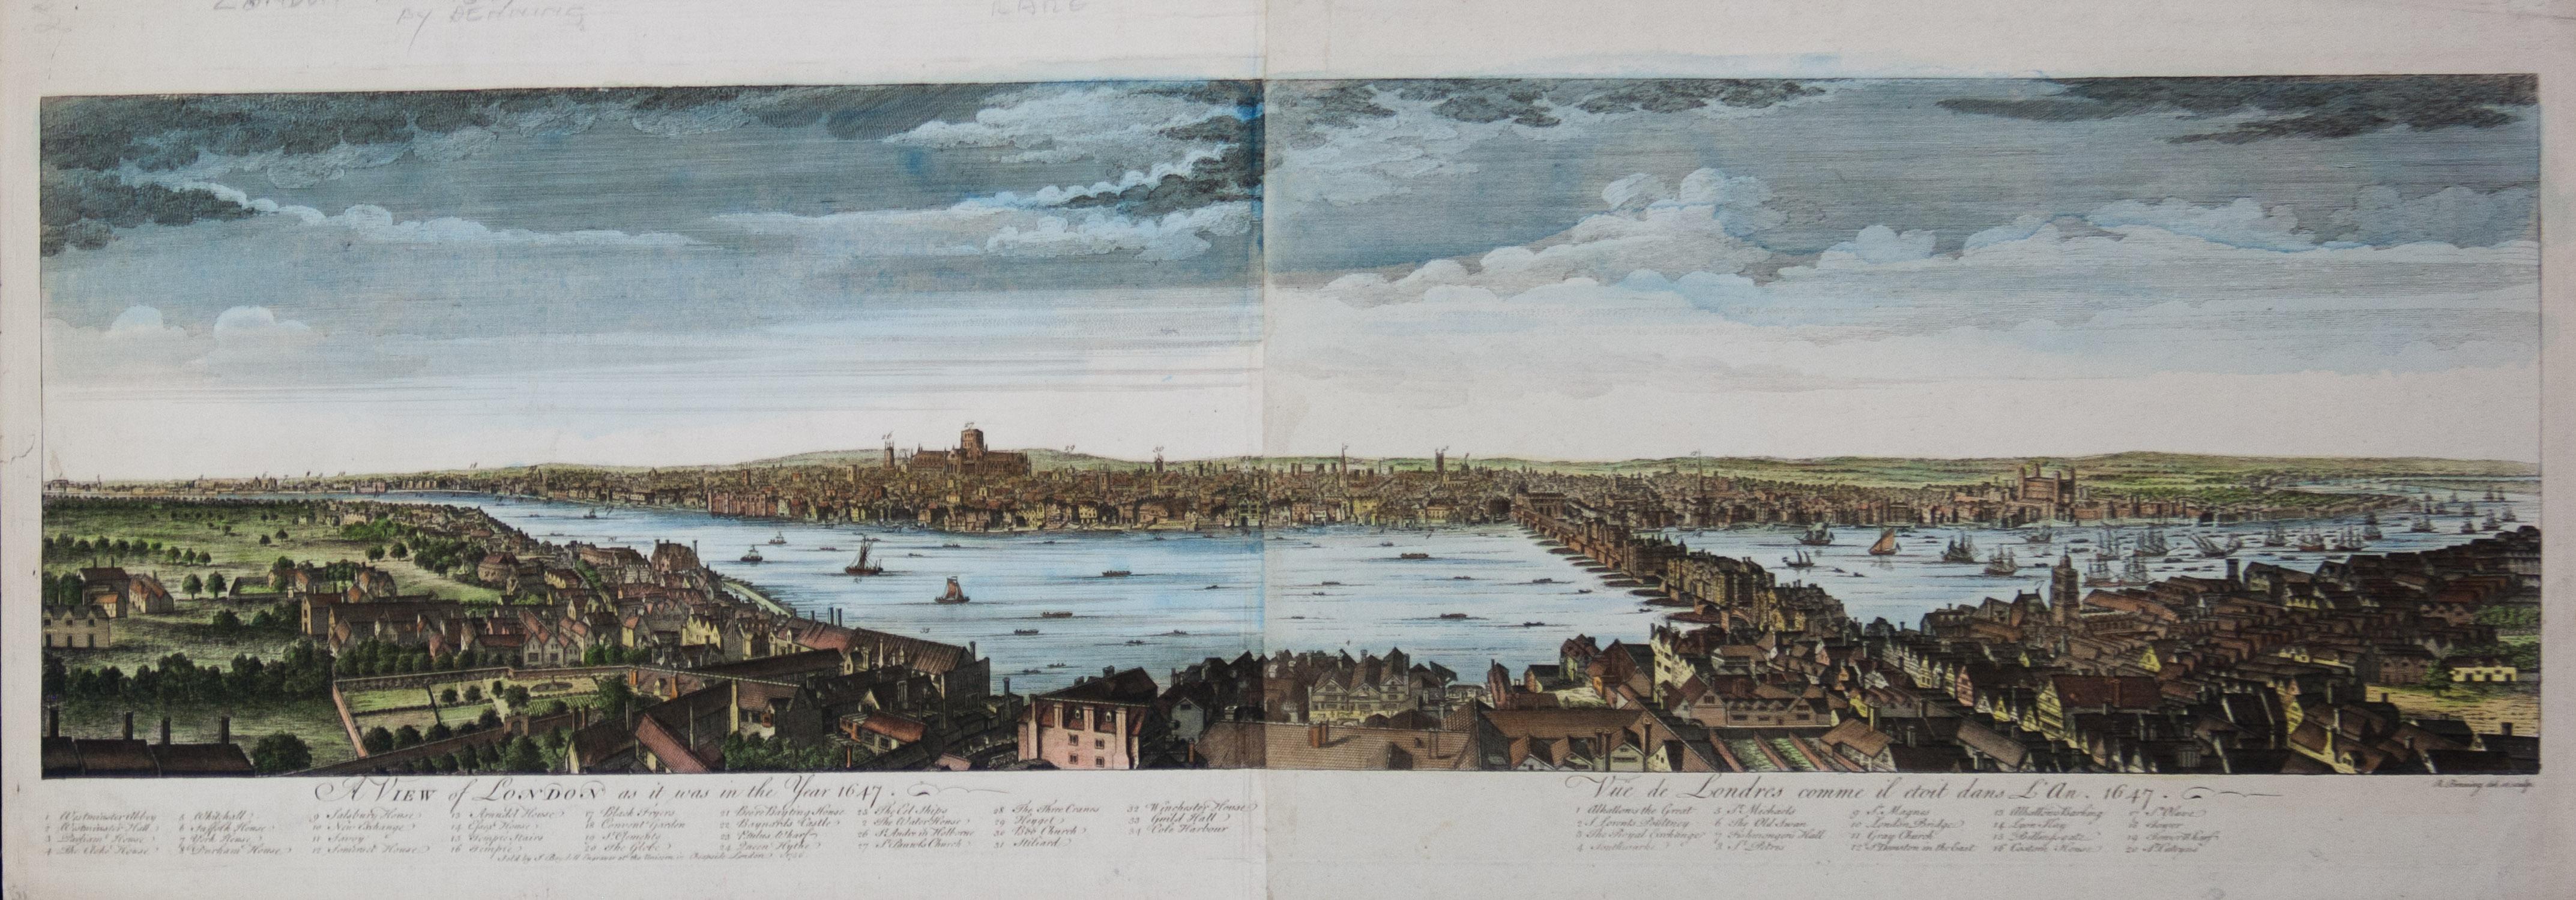 John Boydell Print - A View of London as it was in the Year 1647 pub. by Boydell 1756